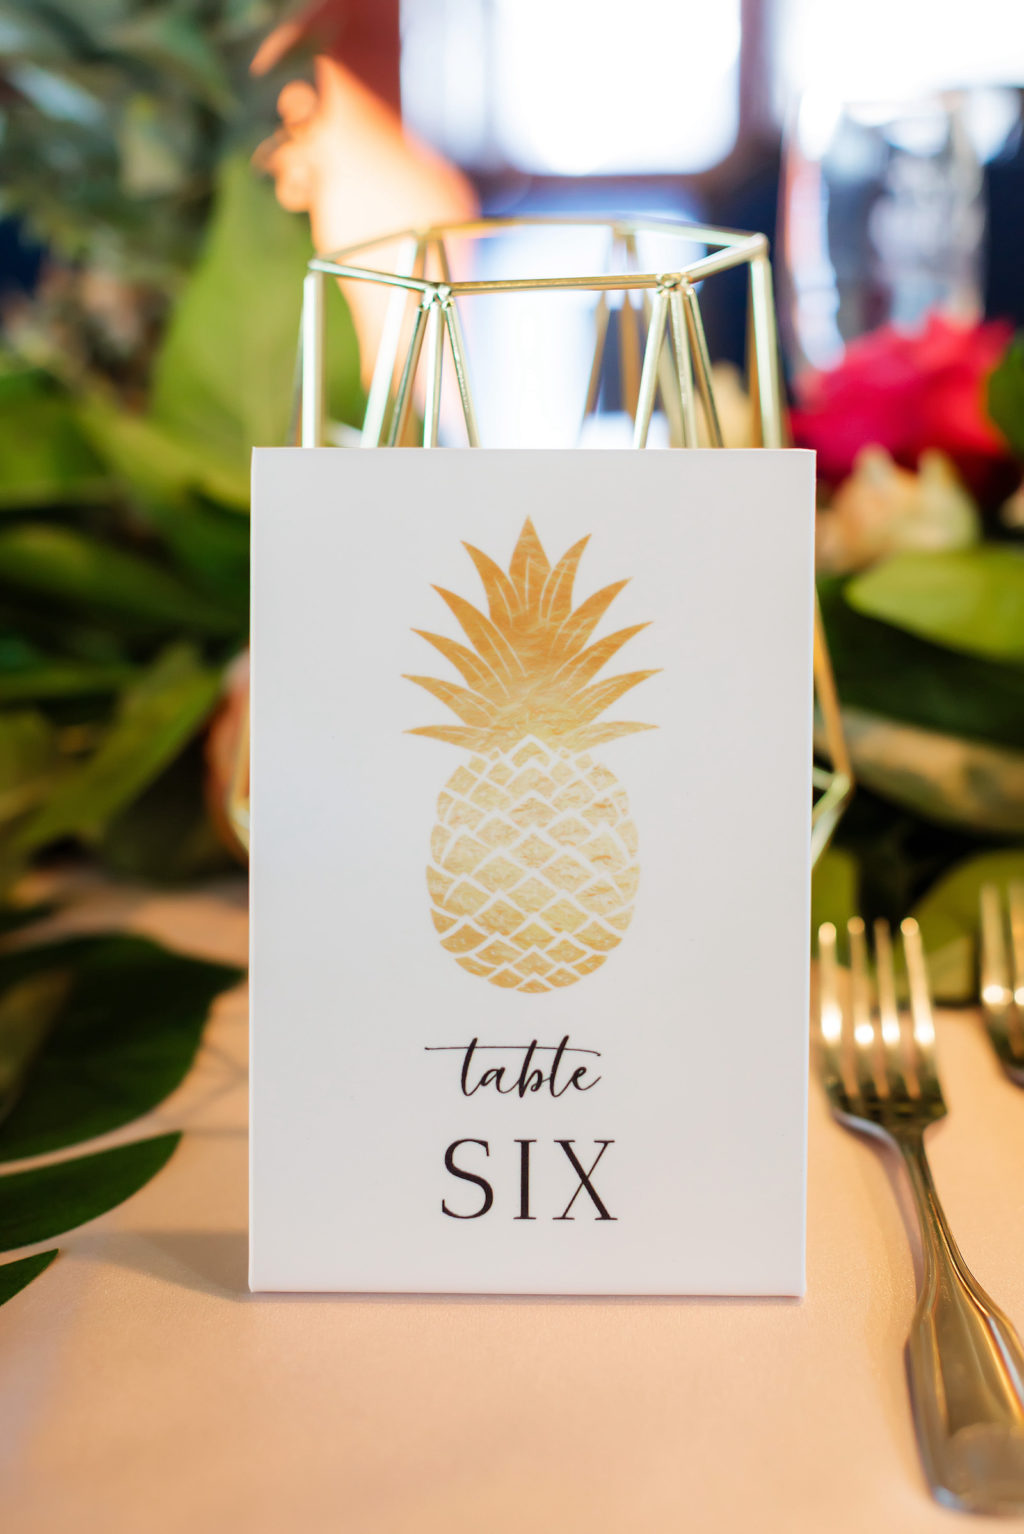 Tropical Wedding Reception Decor, White and Gold Table Number Sign | Tampa Bay Wedding Photographer Limelight Photography